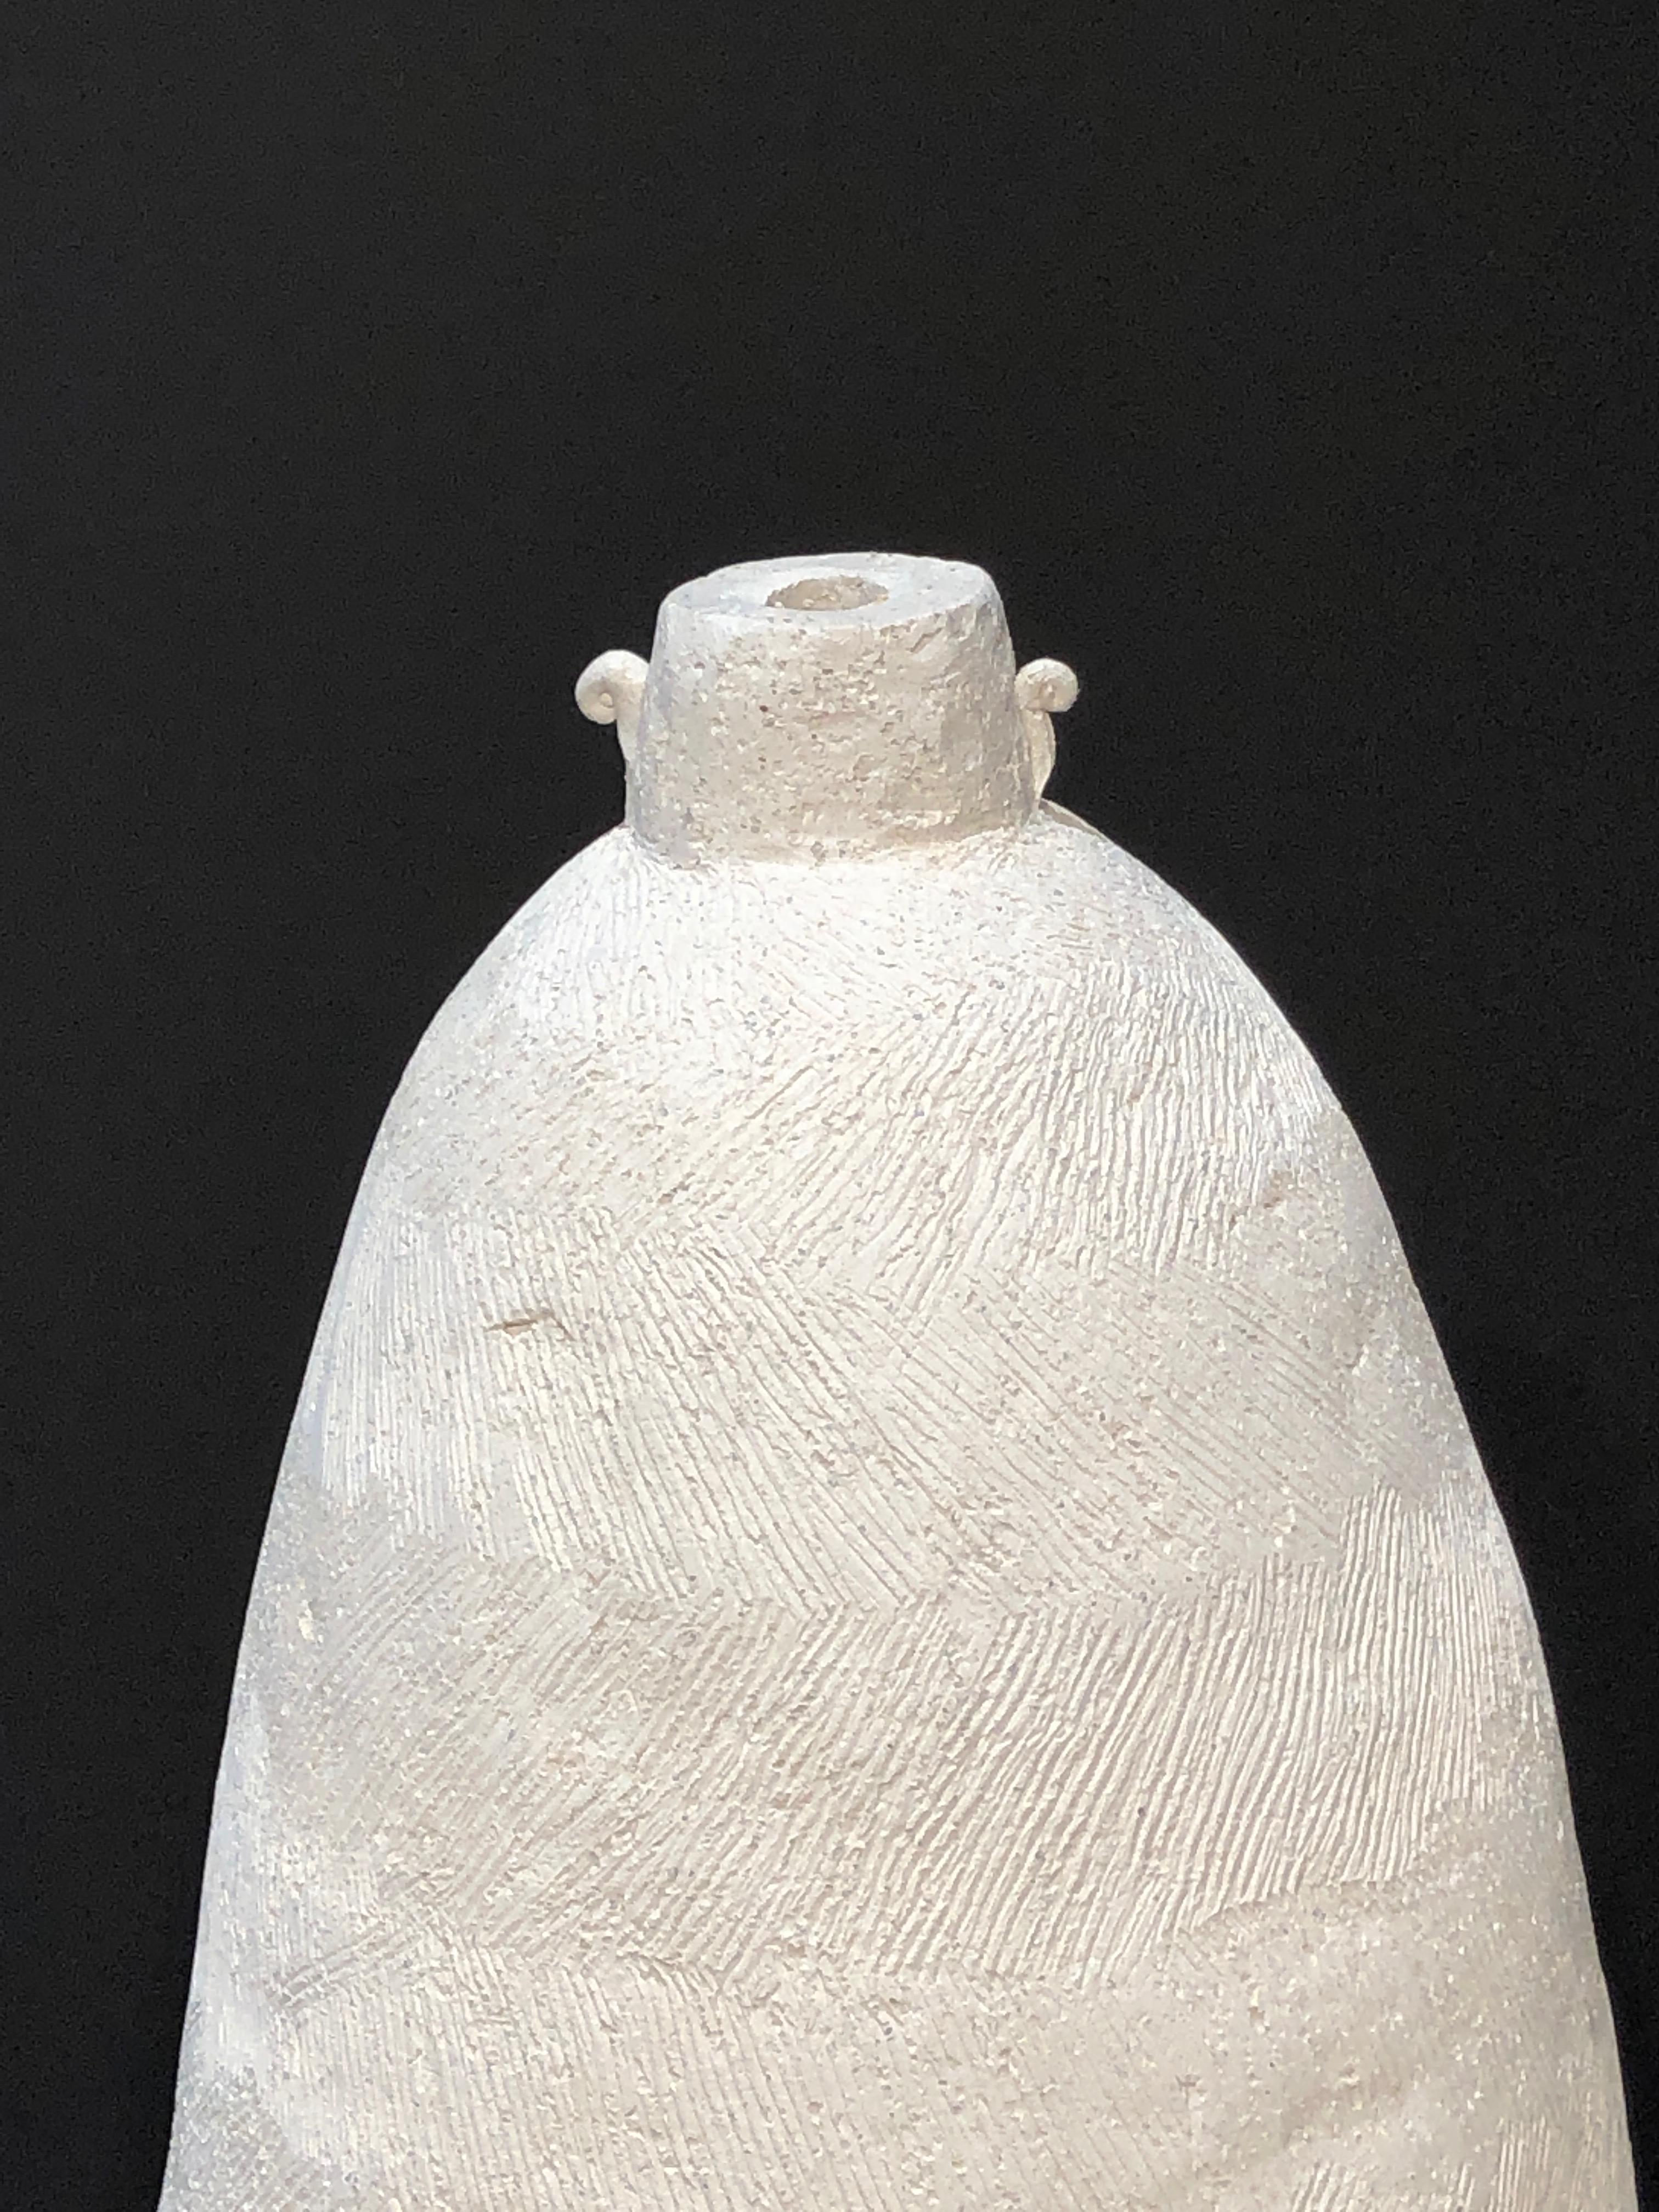 Hue, gourd series, white ceramic abstract gourd, vertical, contemporary, Maori - Sculpture by Wi Taepa